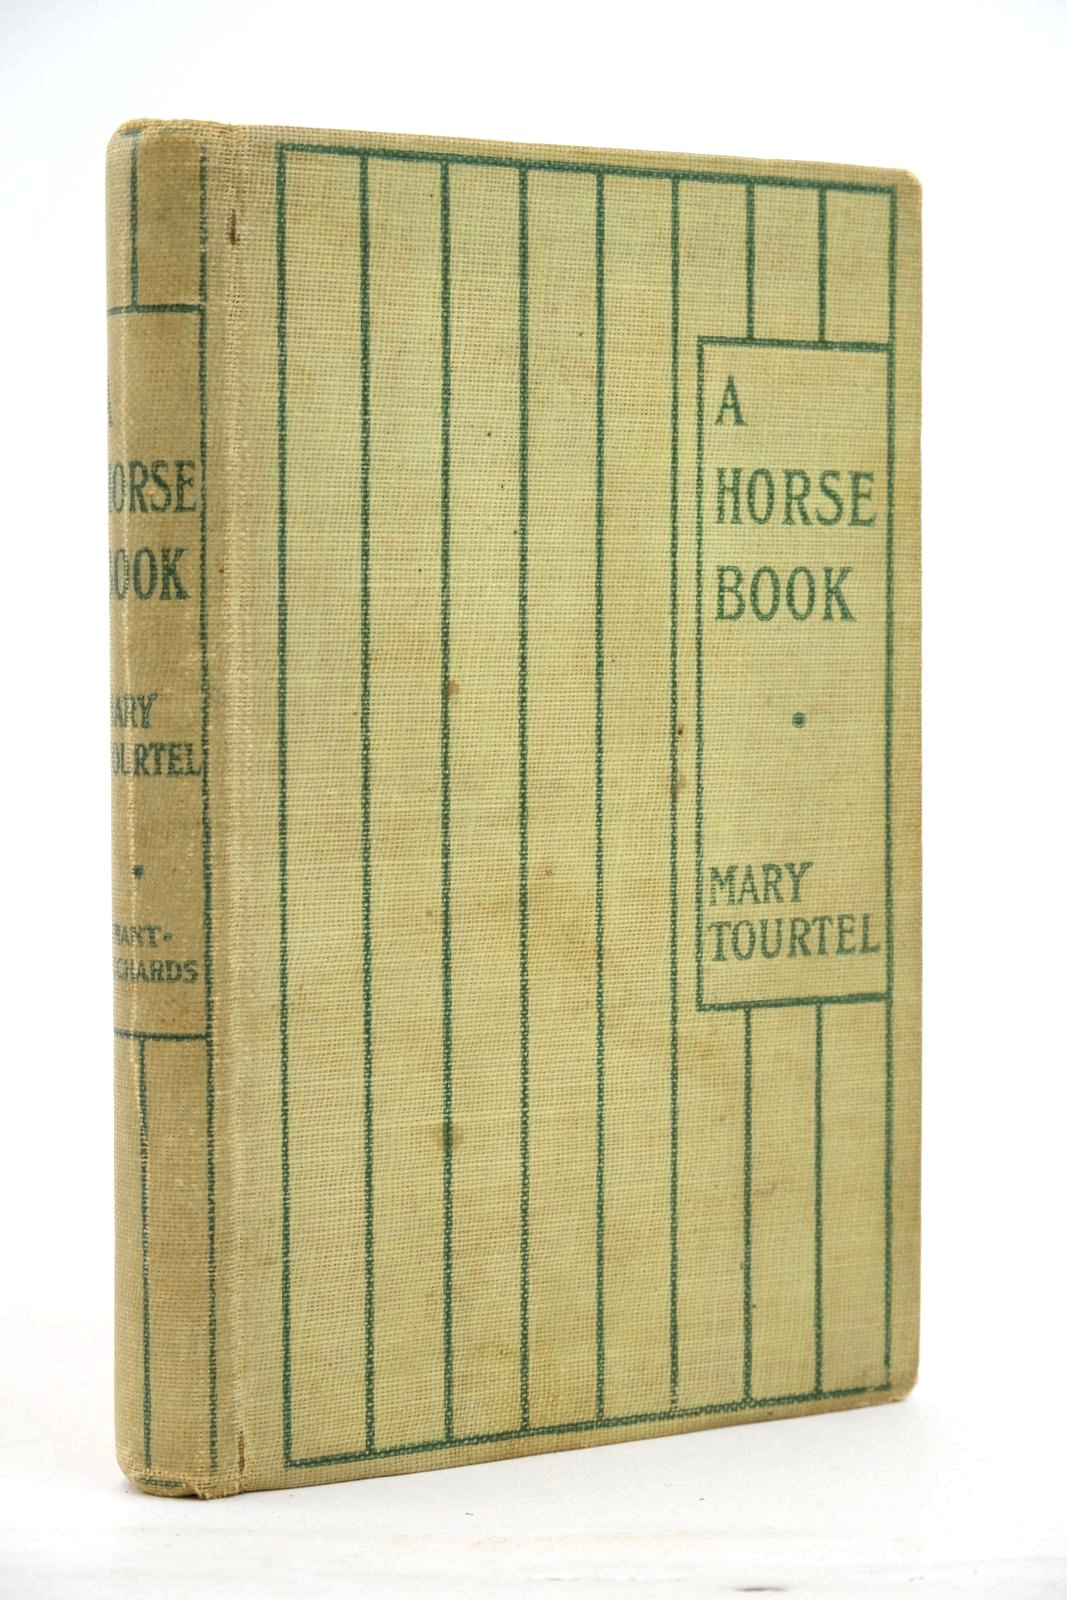 Photo of A HORSE BOOK- Stock Number: 2137491